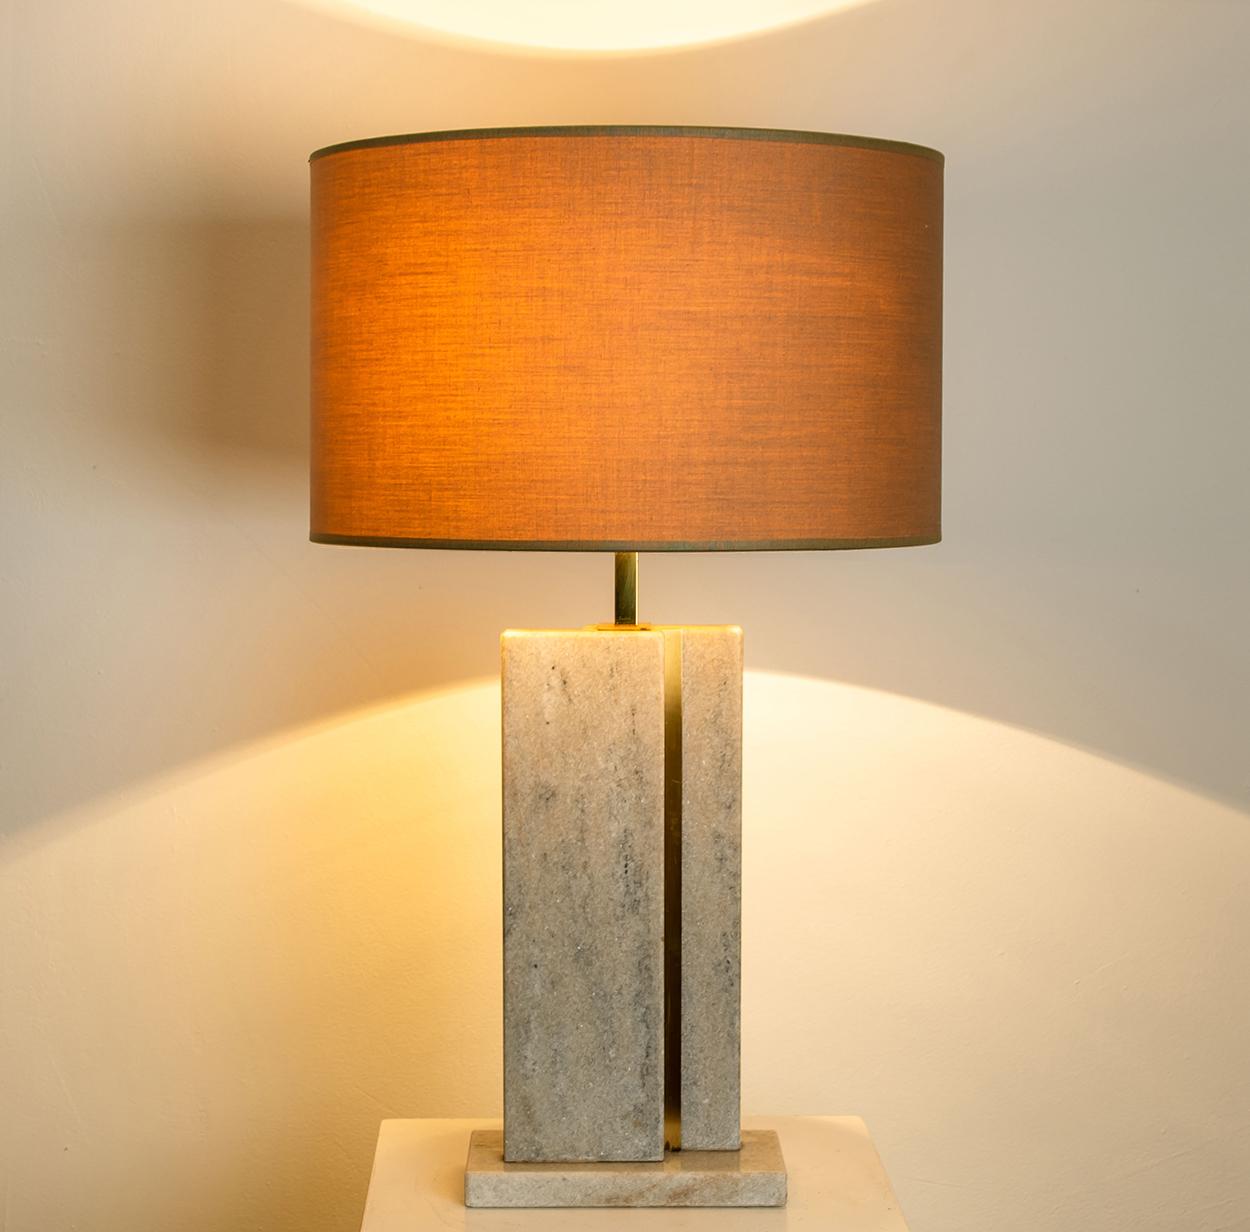 Camille Breesch Travertine Table Lamp with New Shade In Good Condition For Sale In Rijssen, NL